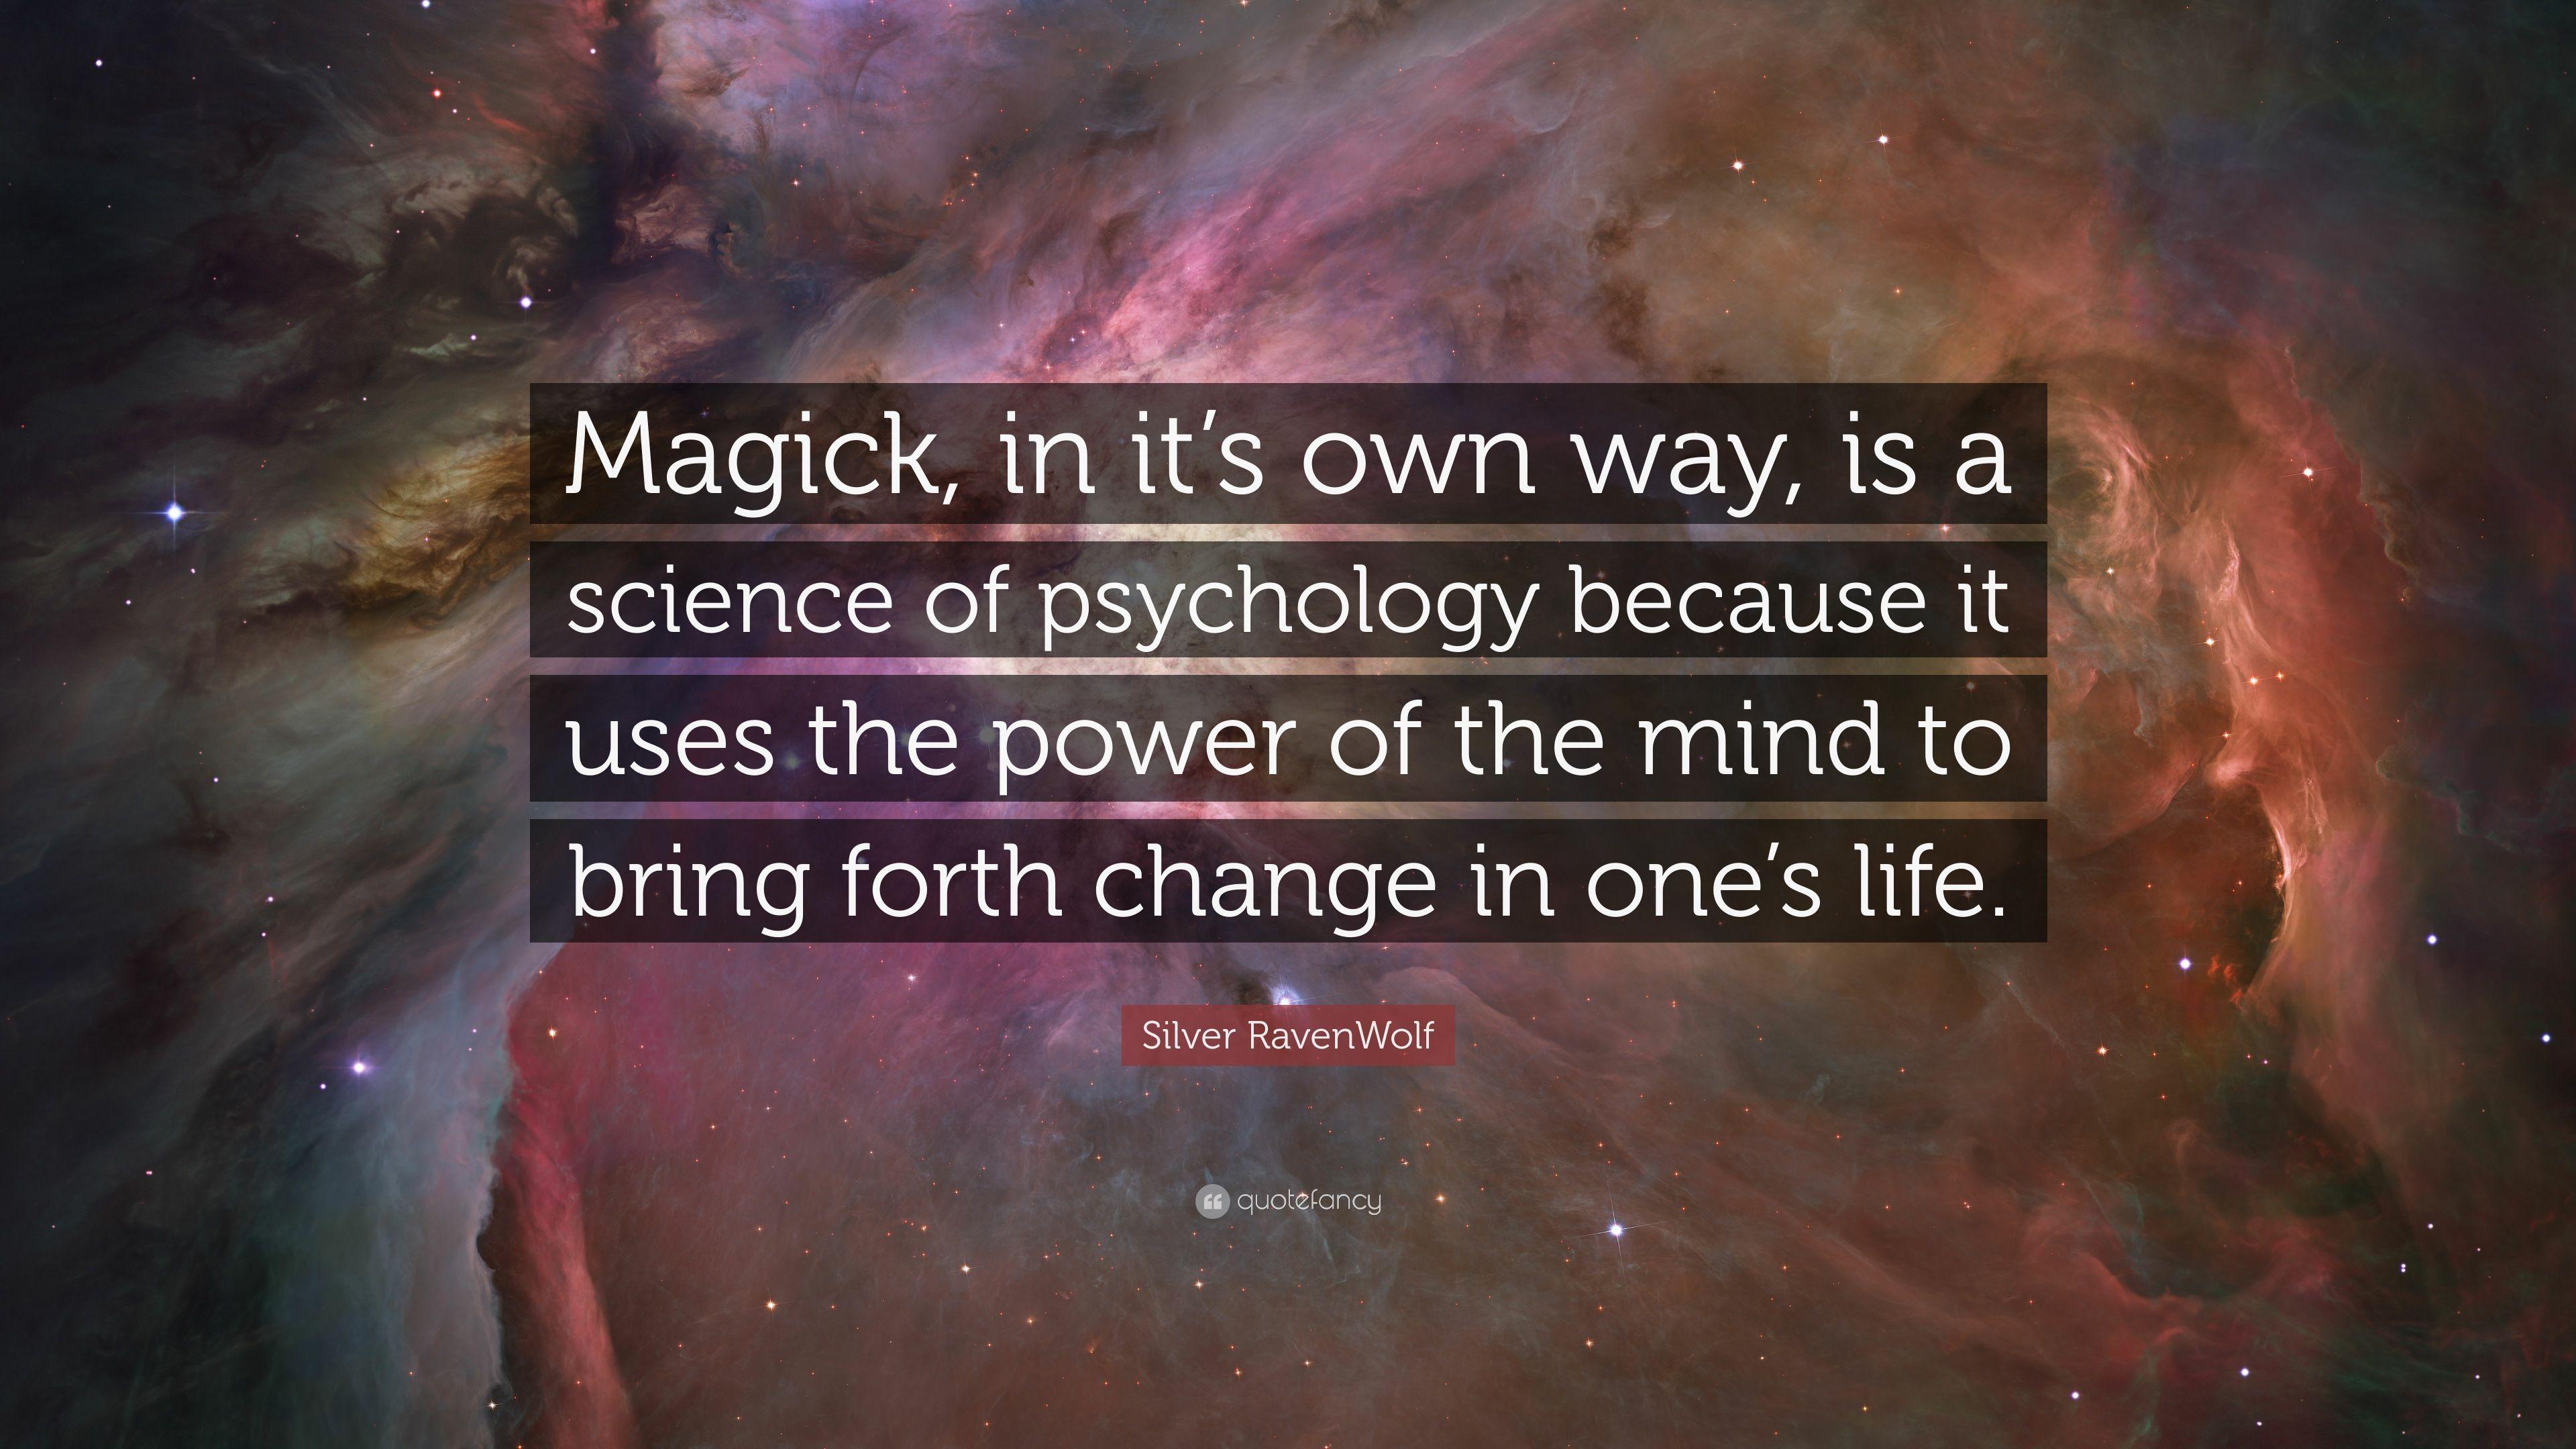 Silver RavenWolf Quote: “Magick, in it's own way, is a science